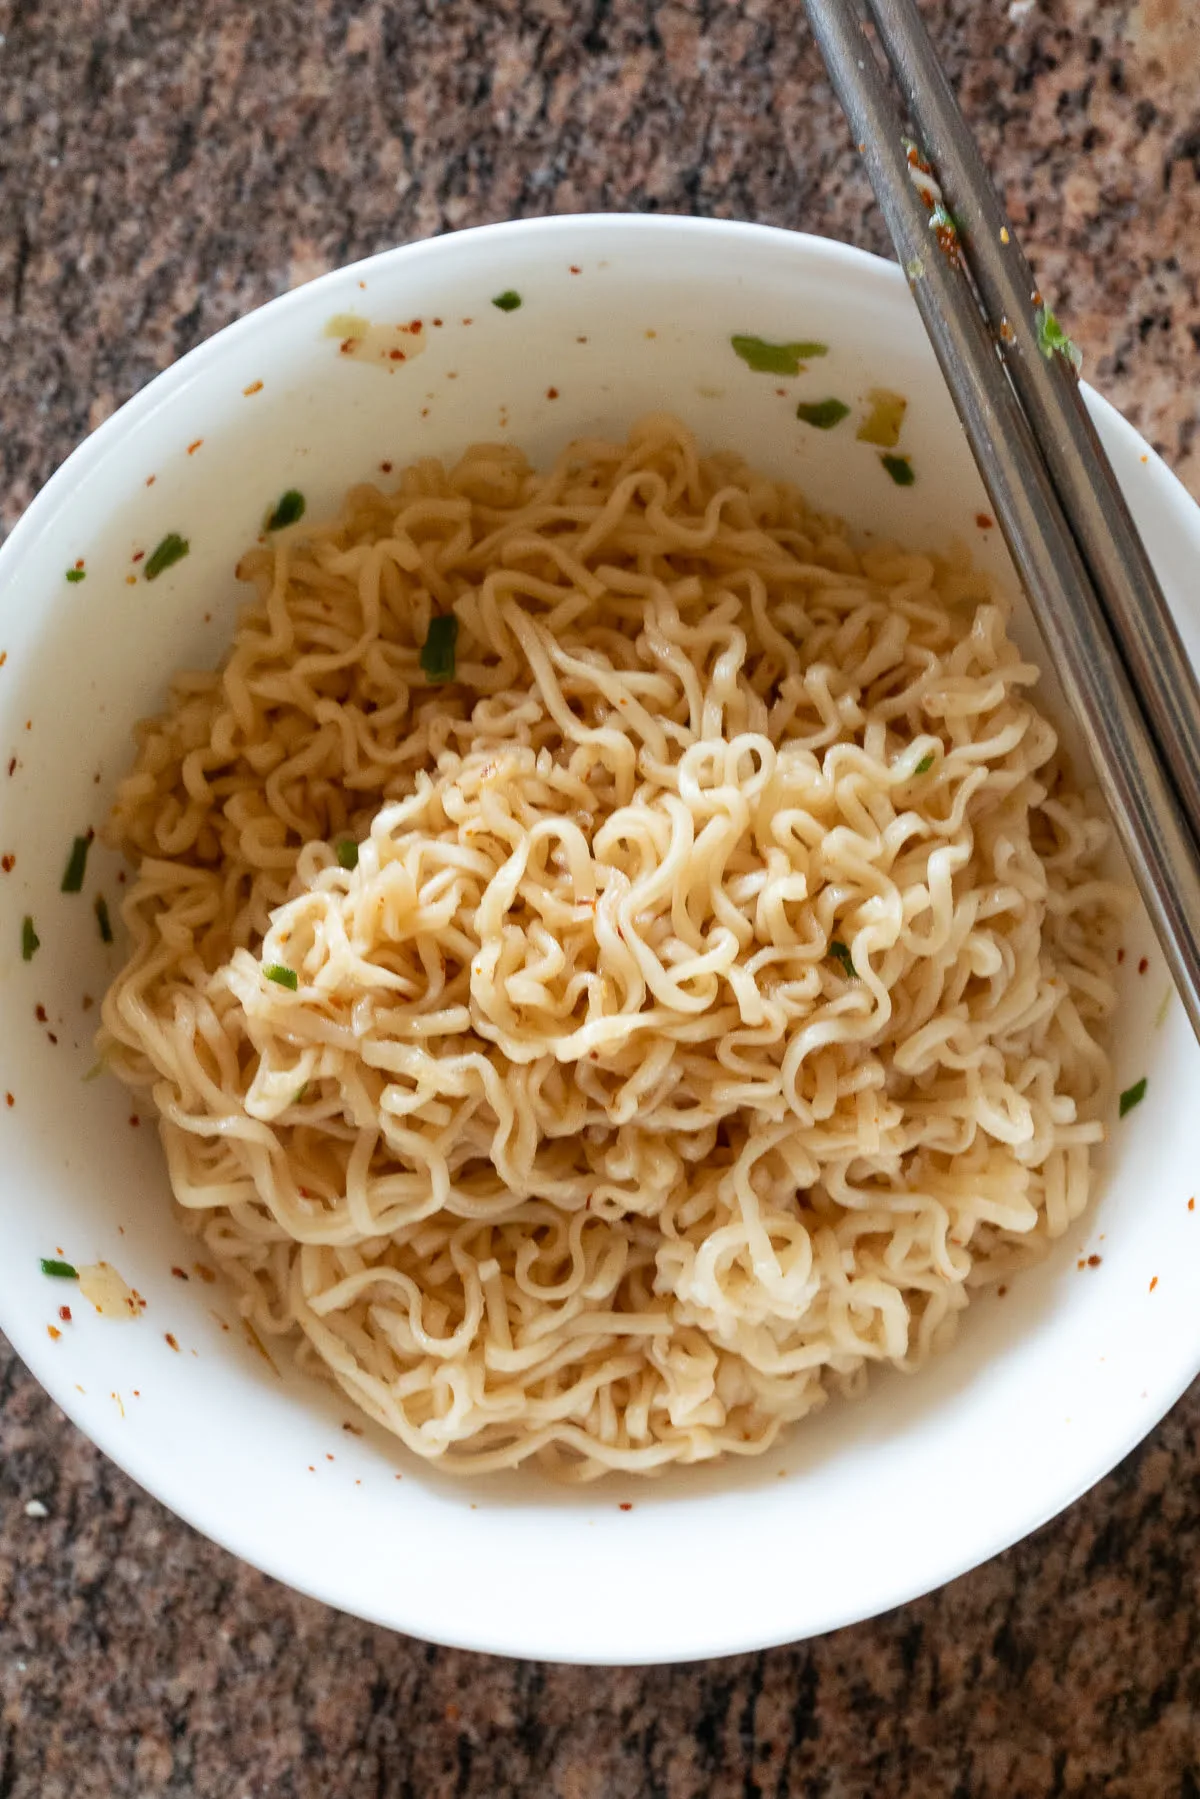 Prepared bowl of Mama noodles ready to eat.